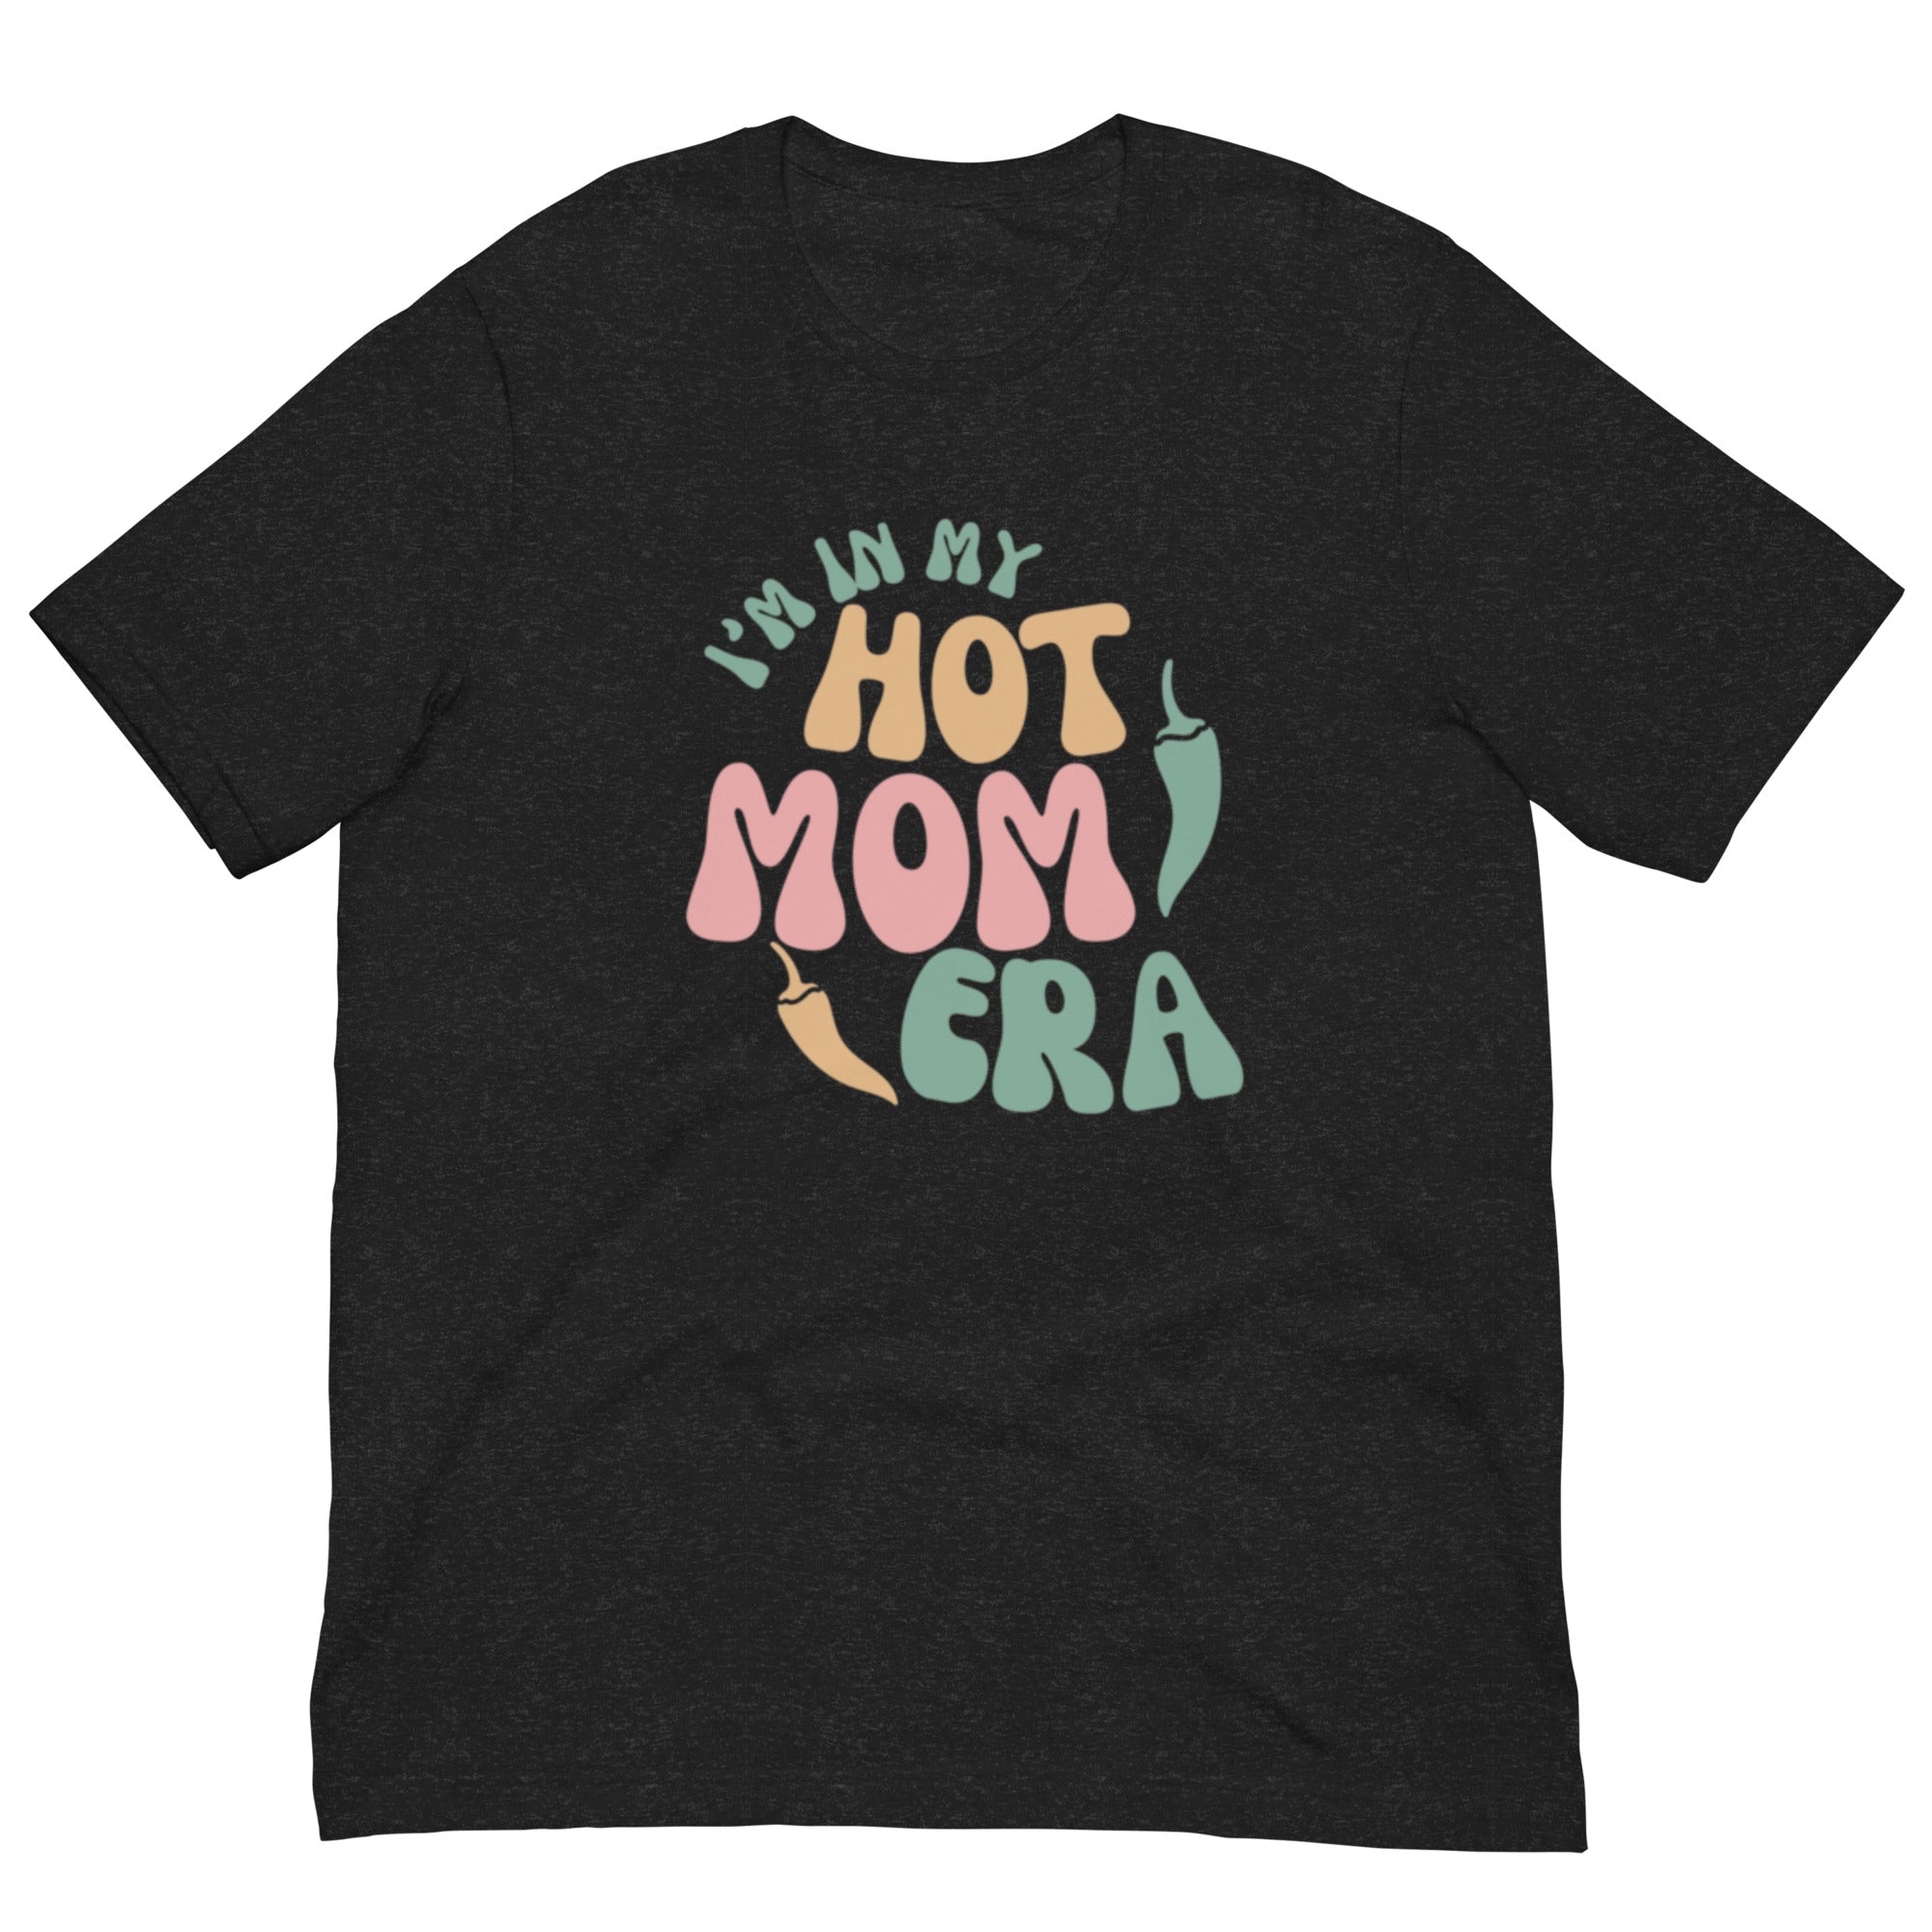 A black Era Shirt featuring the phrase "in my hot mom era" in colorful, playful lettering. The text includes shades of pink, teal, and yellow. This breathable t-shirt is crafted from